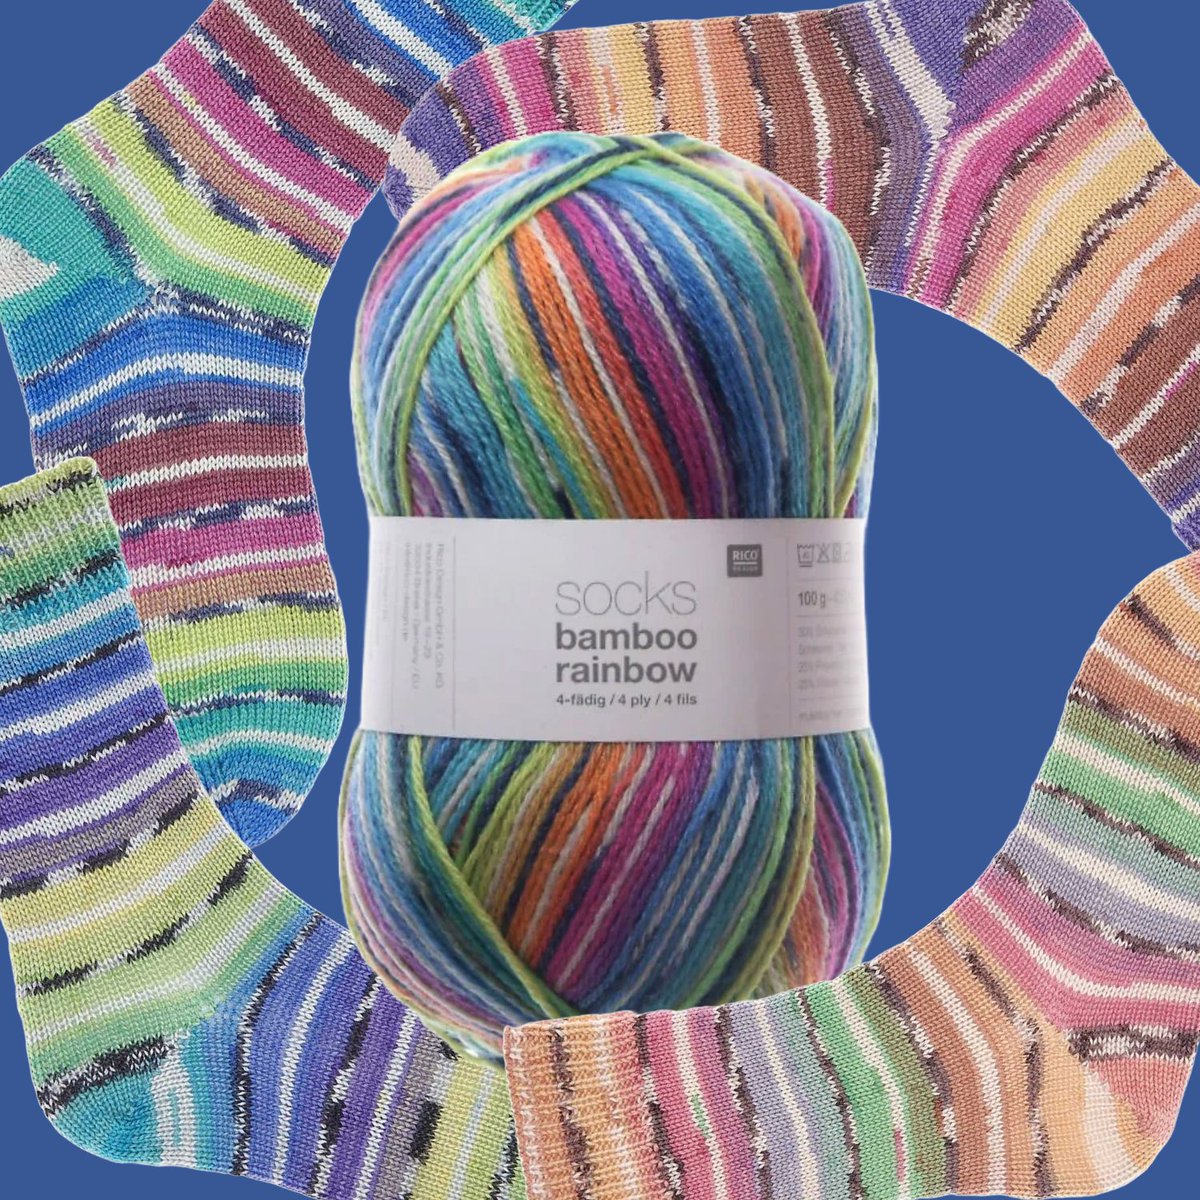 Rico Bamboo Rainbow 4ply is a brand new sock yarn that has caught our eye! Beautiful rainbows 🌈 for your feet to brighten up your day.

See more shades here - ow.ly/uWq650ReNHs